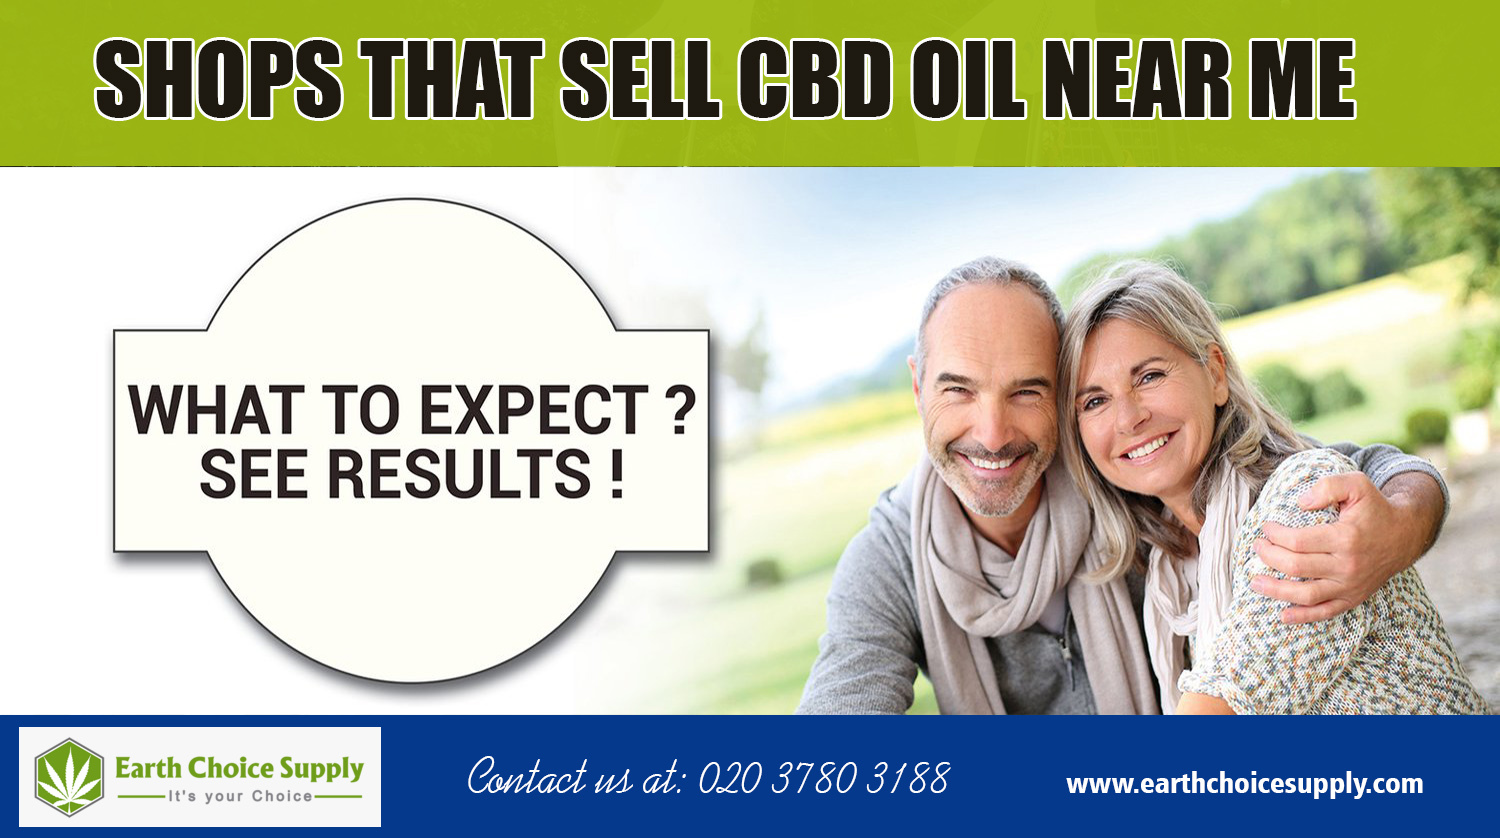 Shops that sell cbd oil near me | Call Us - 416-922-7238 | earthchoicesupply.com